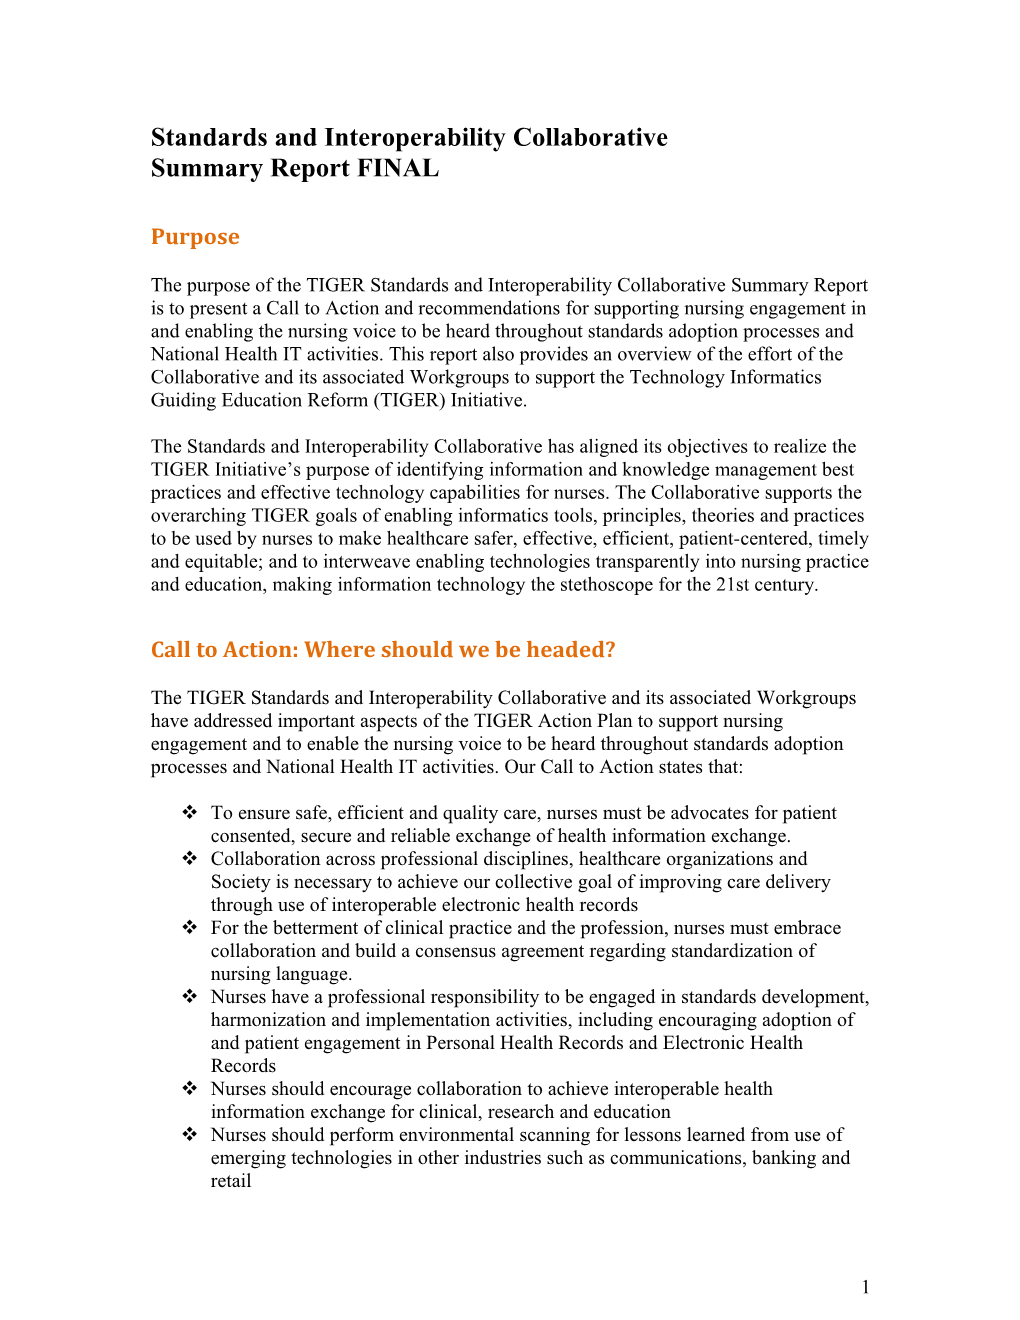 TIGER Standards and Interoperability Collaborative Summary Report Draft